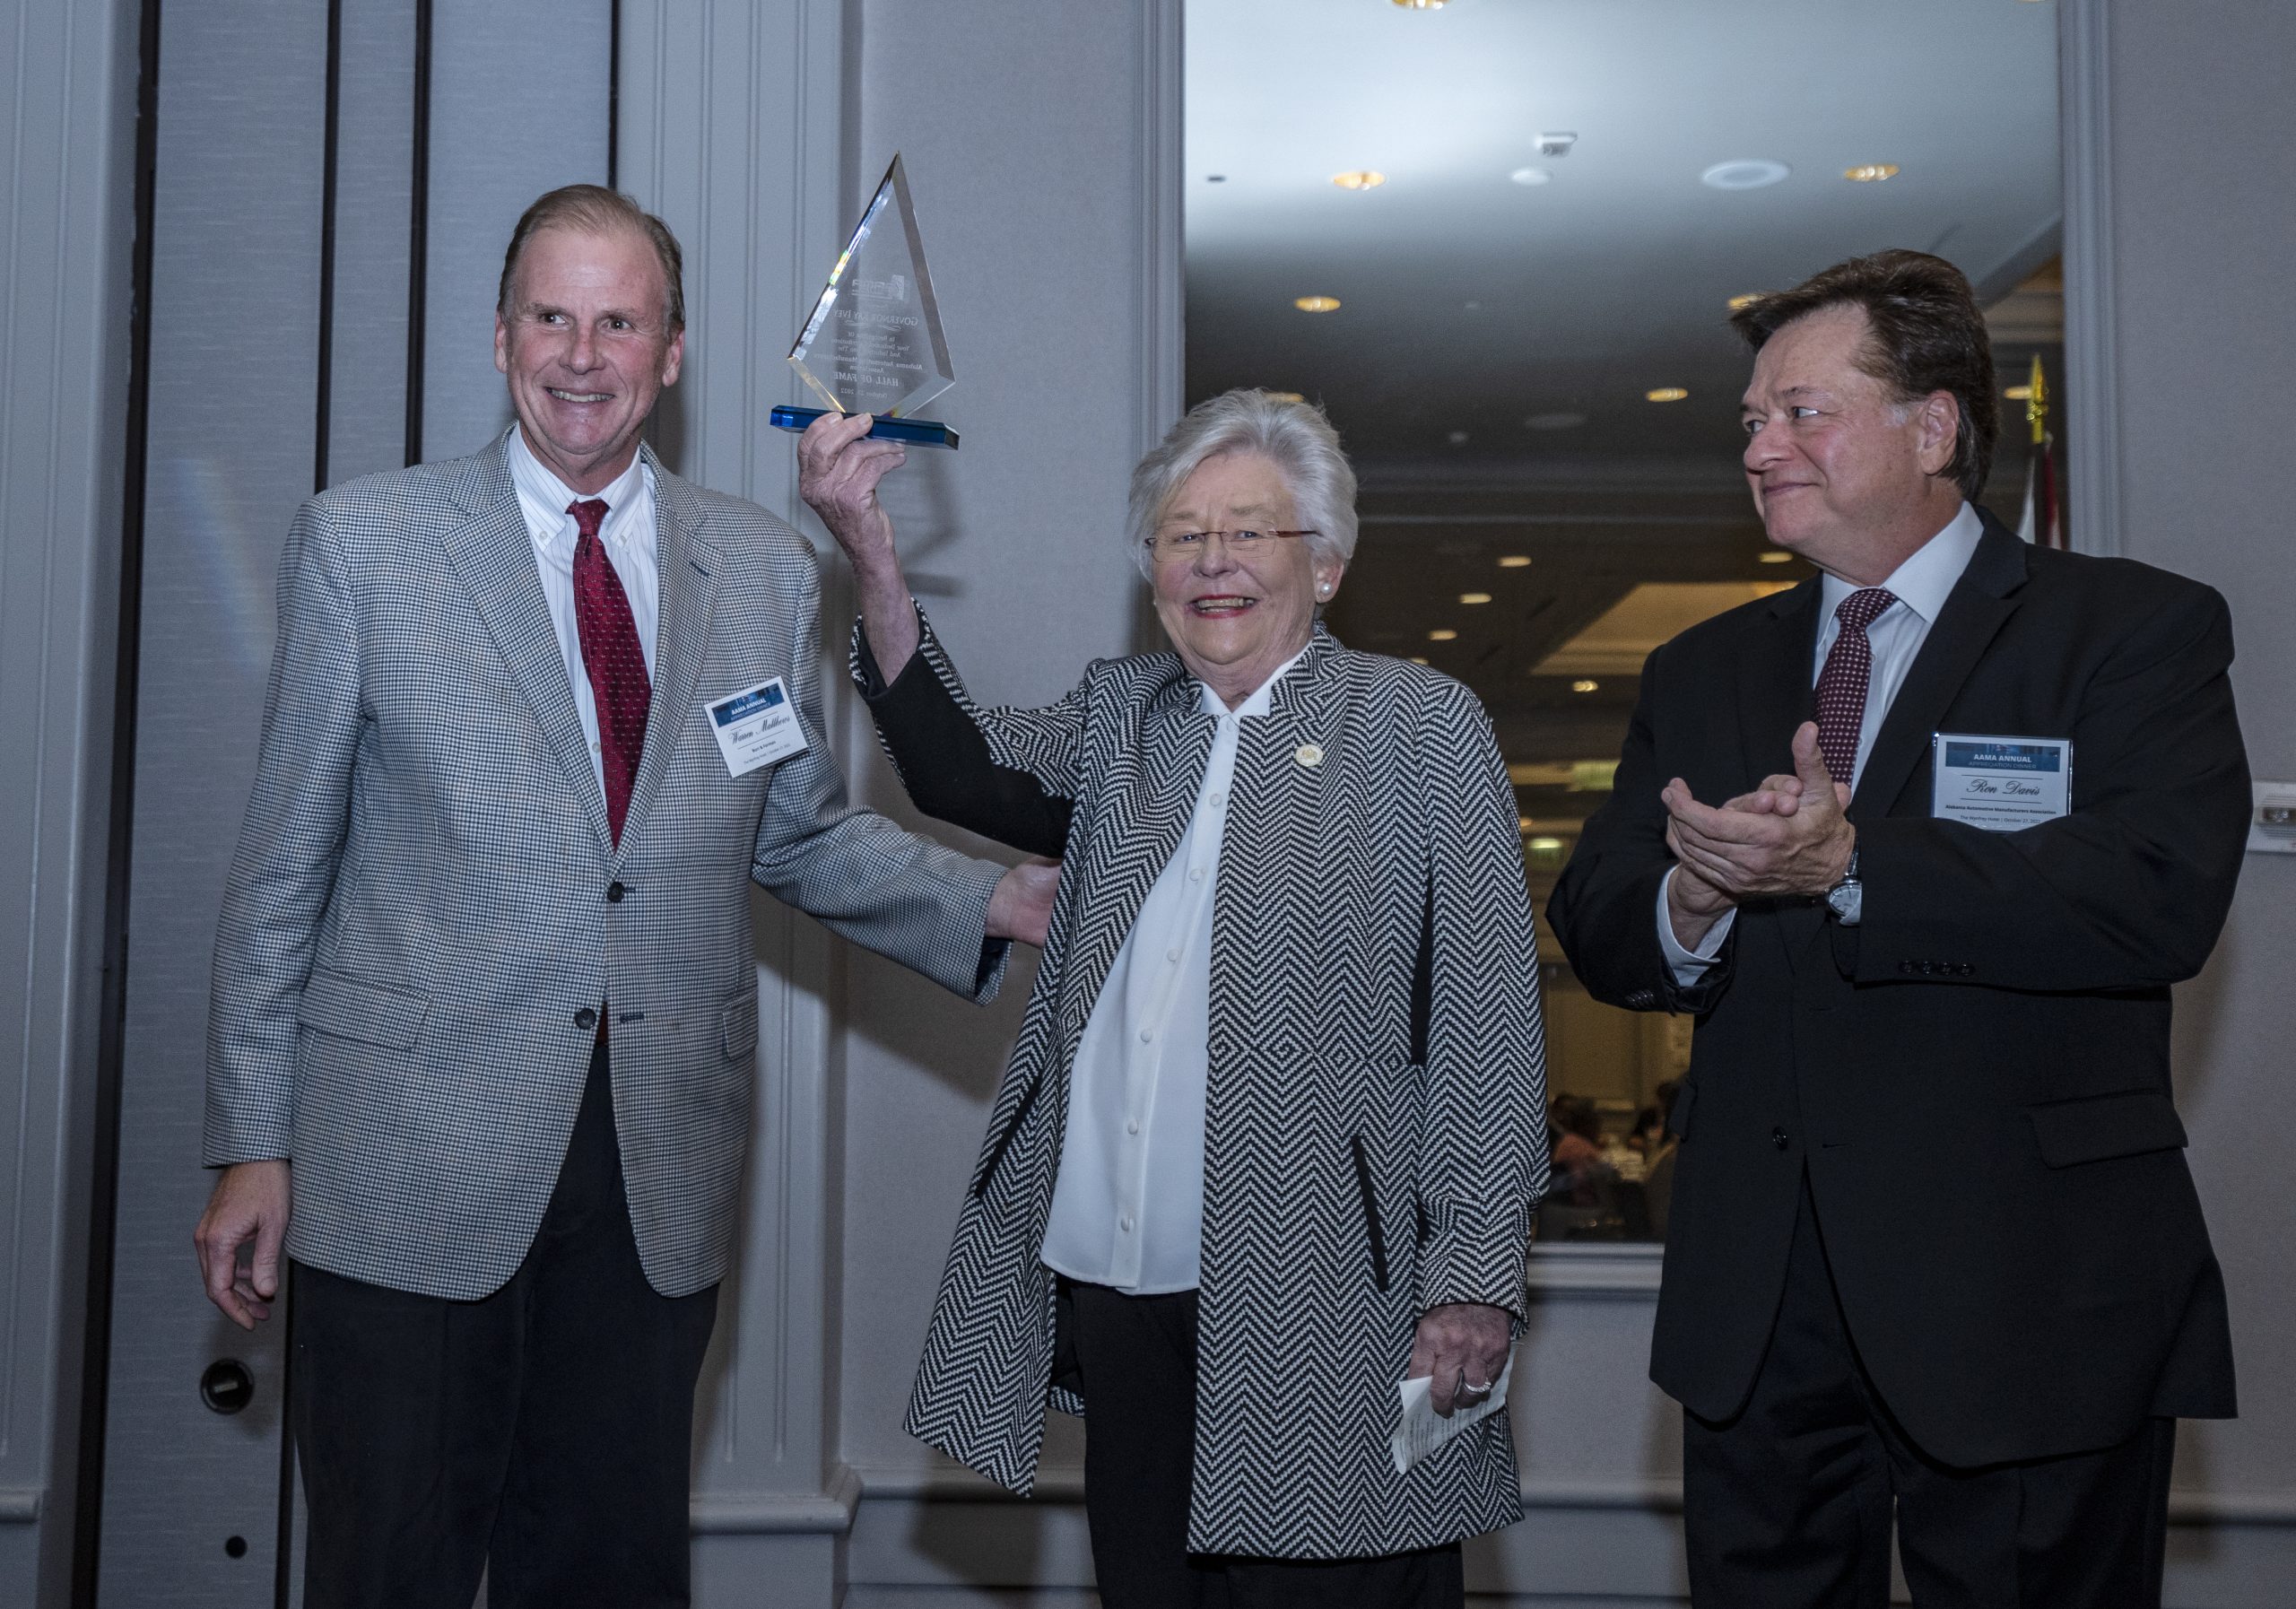 Governor Ivey Tapped for Alabama Auto Manufacturing Group’s Hall of Fame